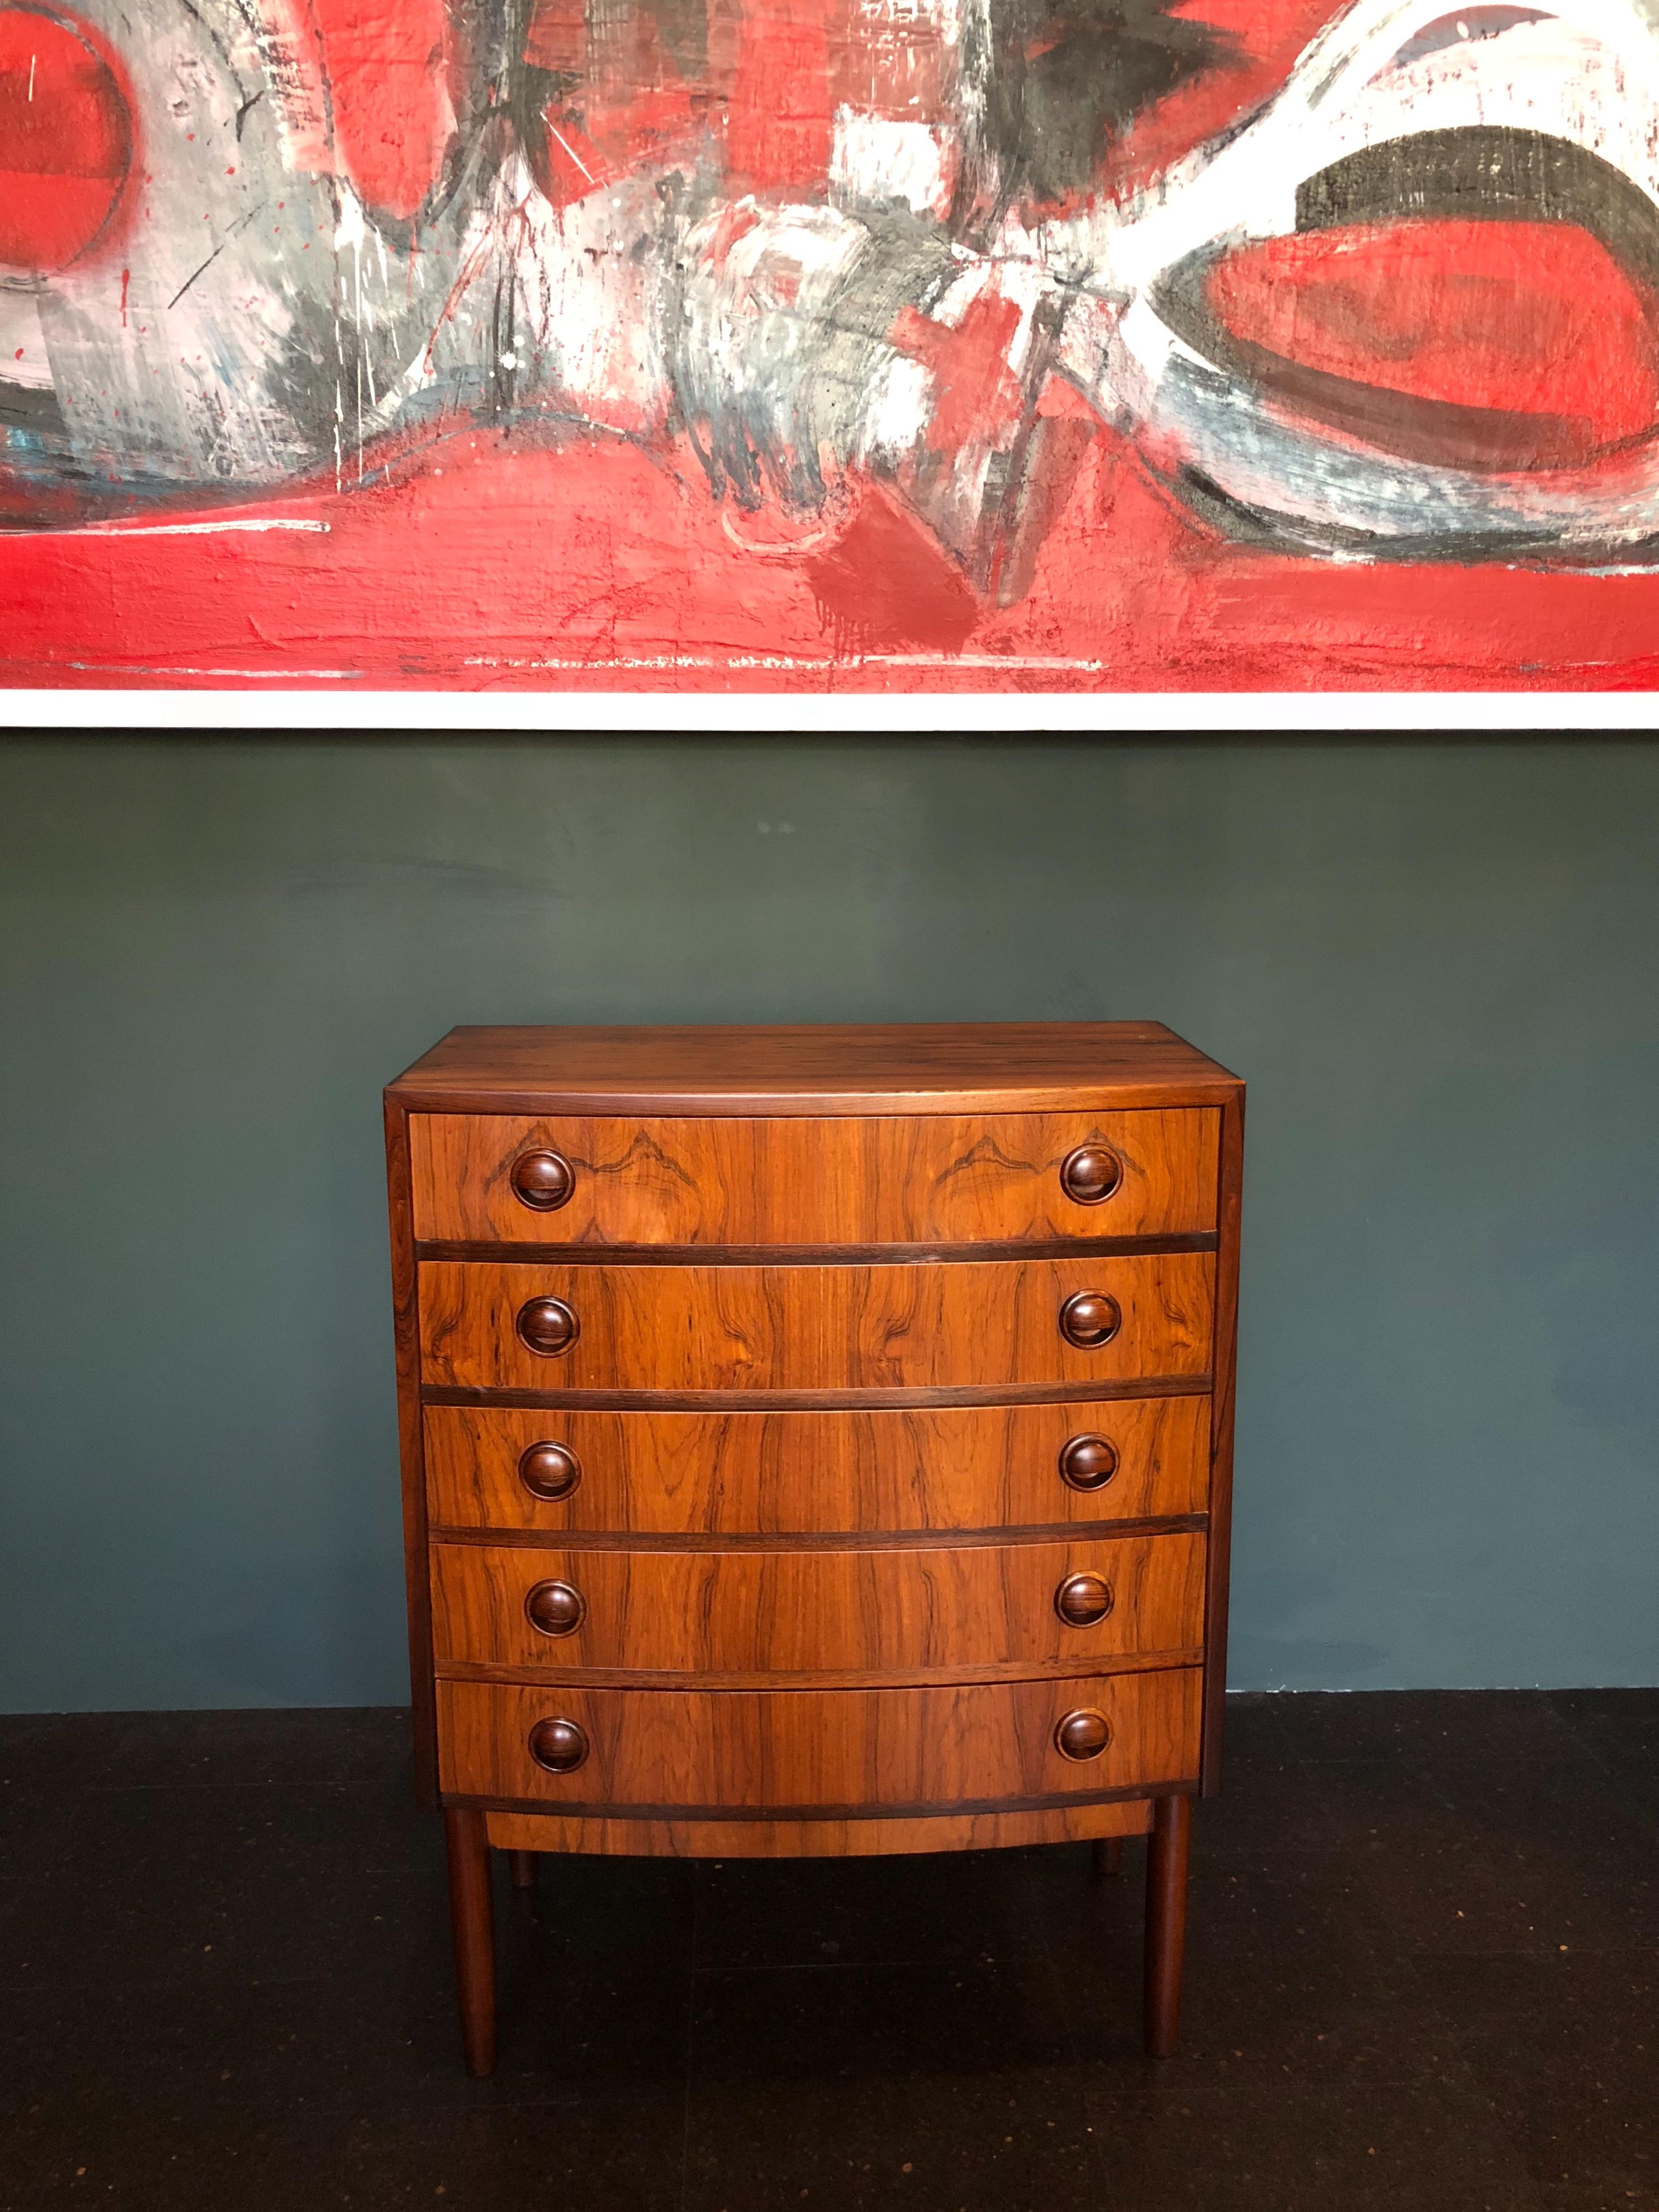 Lovely little chest of drawers by Kai Kristiansen, Denmark 1960. Beautiful colouring to the rosewood and in very good condition throughout.